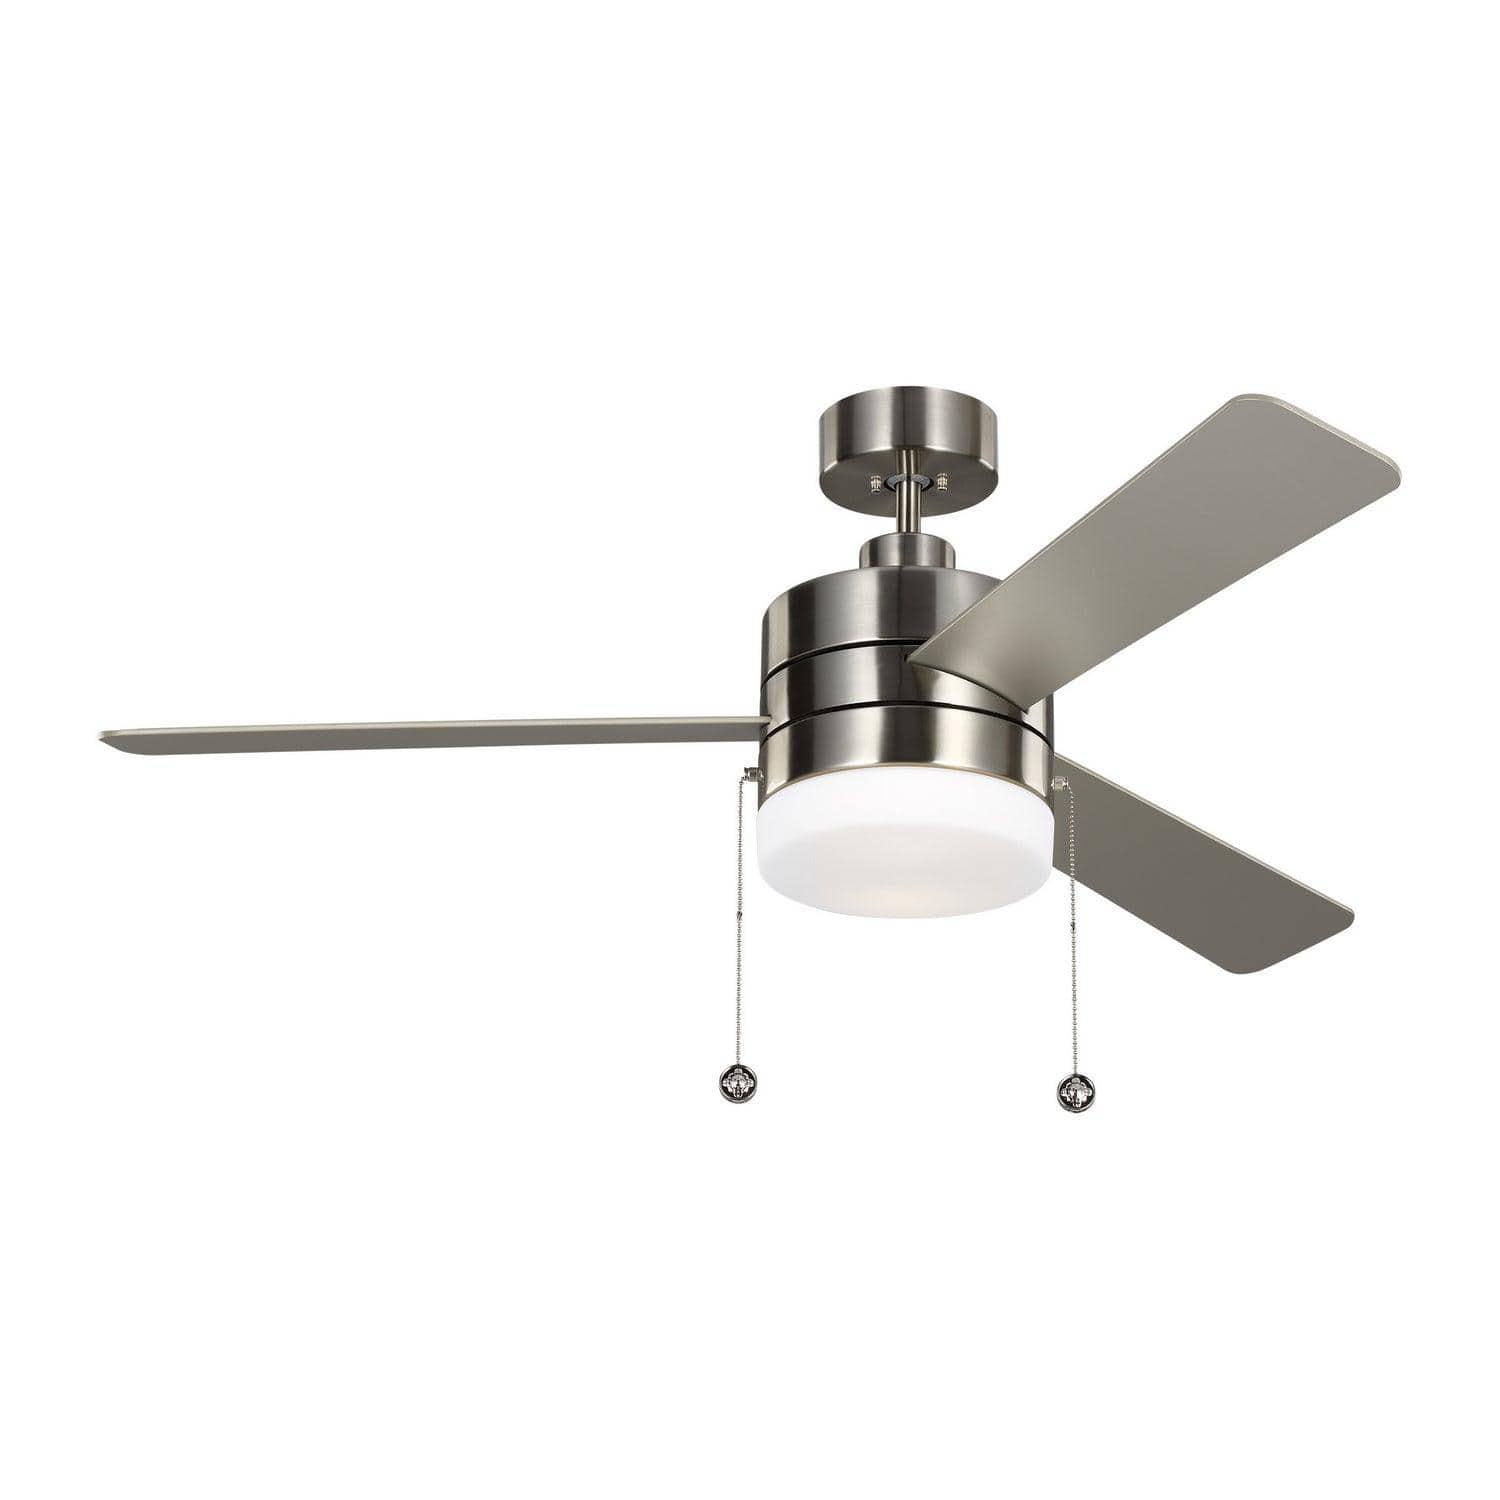 Visual Comfort Fan Collection - Syrus 52" Ceiling Fan - 3SY52BSD | Montreal Lighting & Hardware